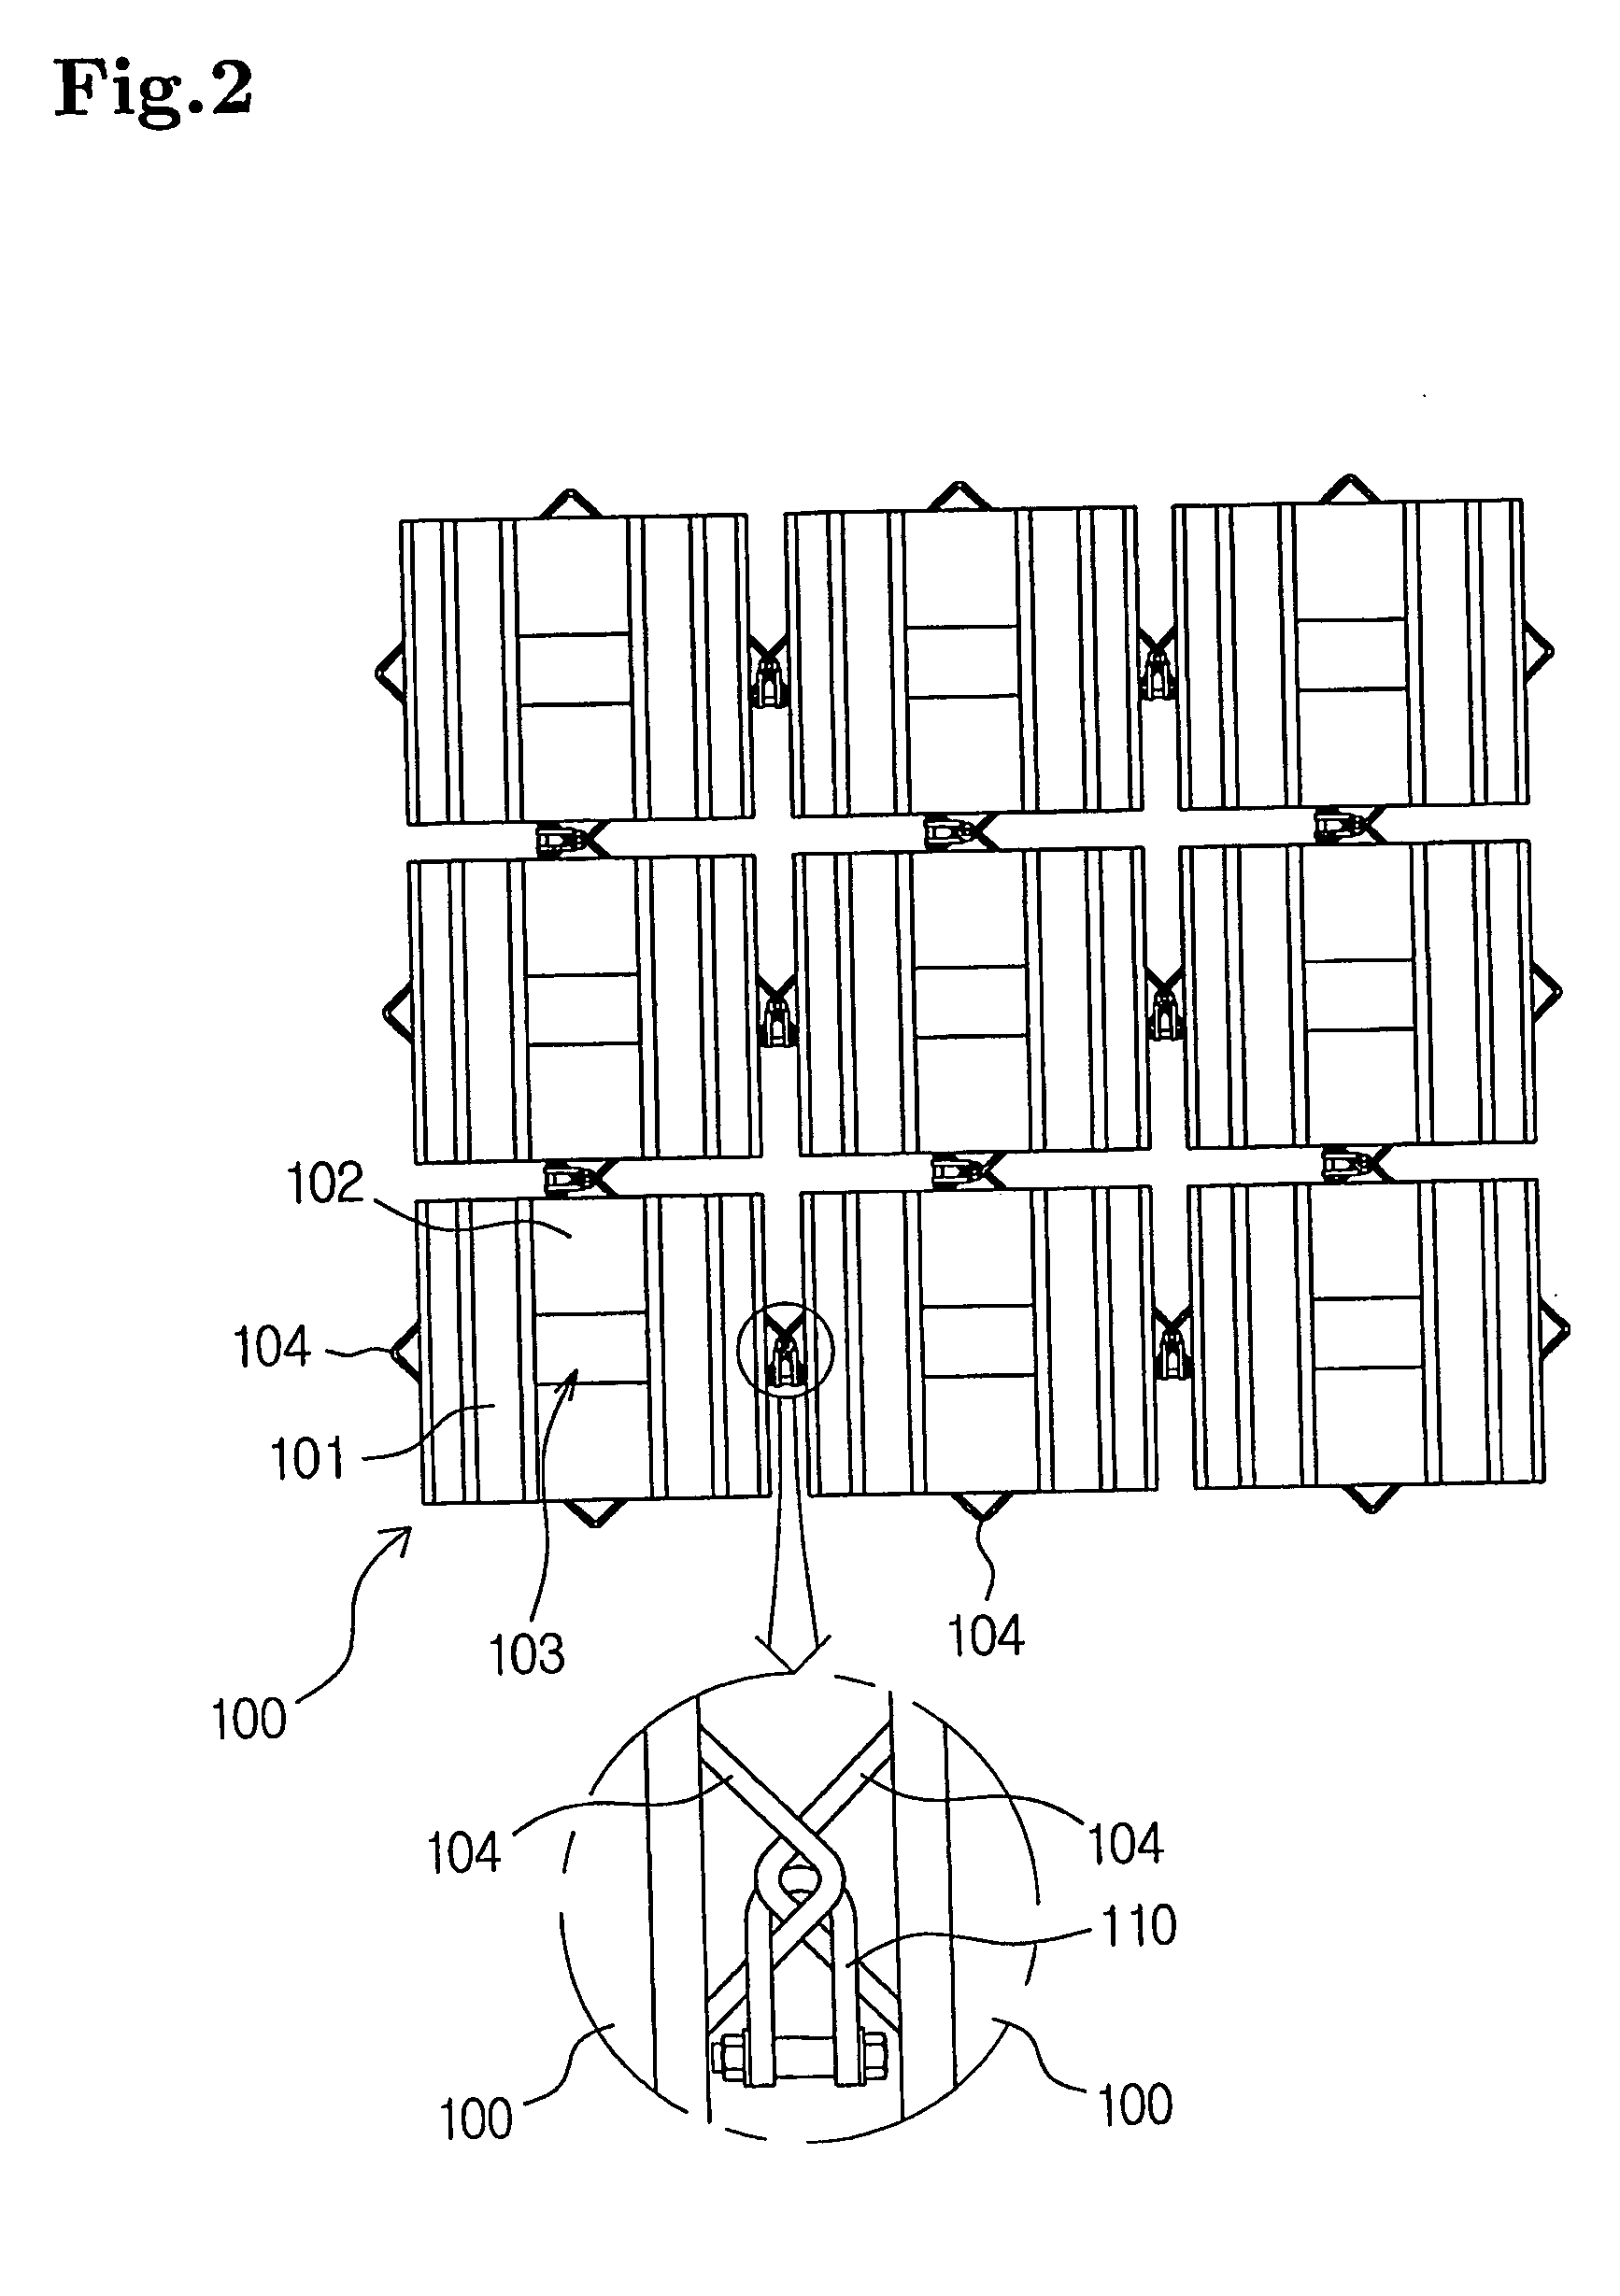 Method for contructing check dam or fire prevention dam using gear-type block